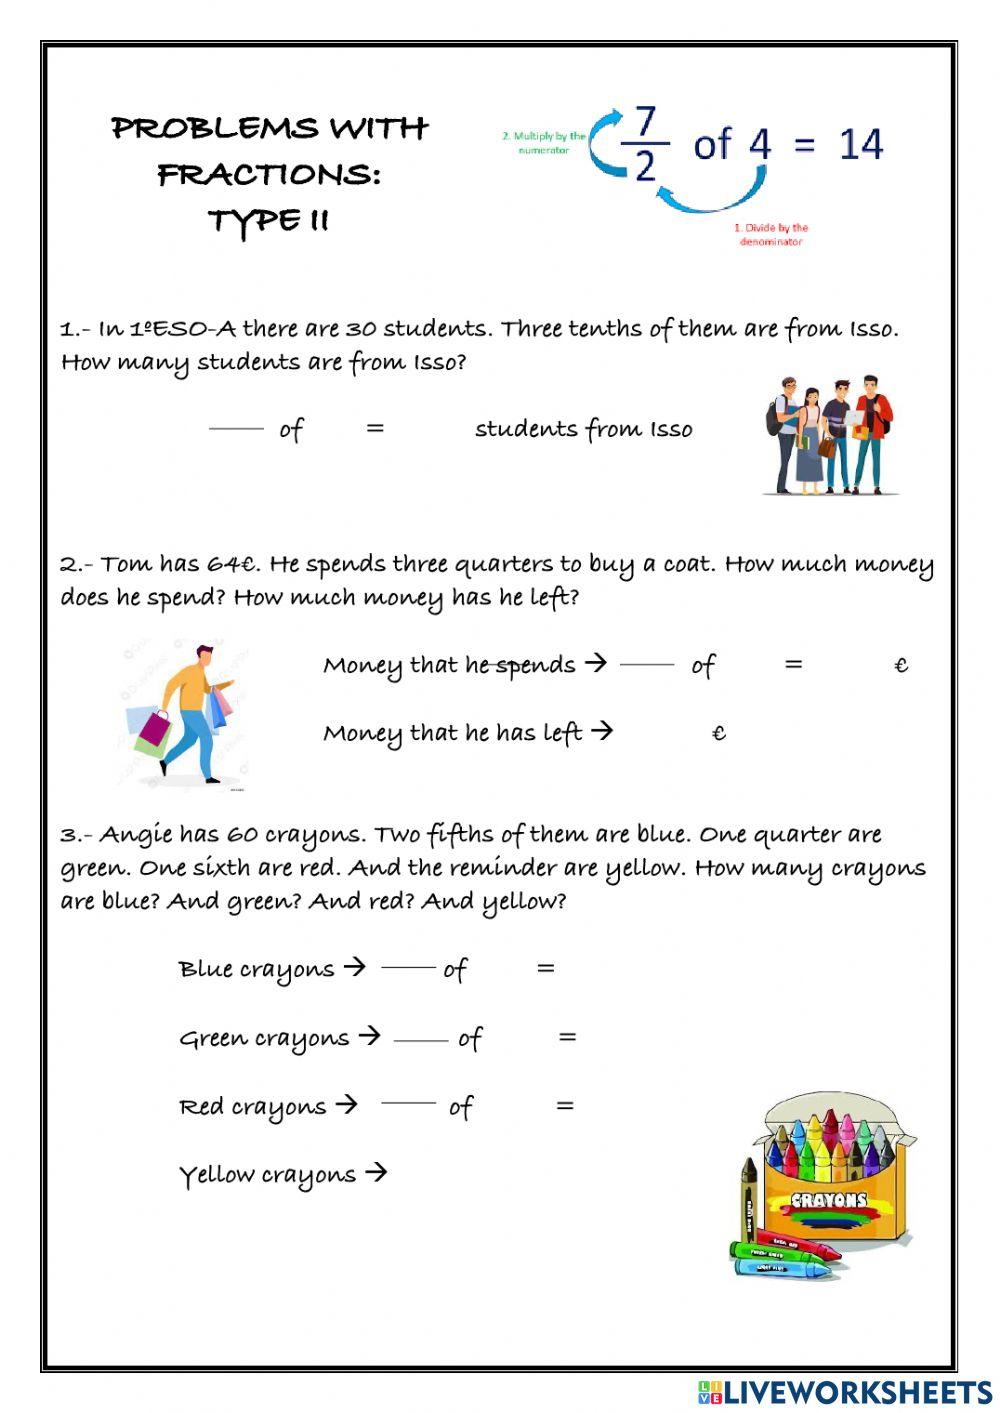 Word Problems with Fractions. Type II